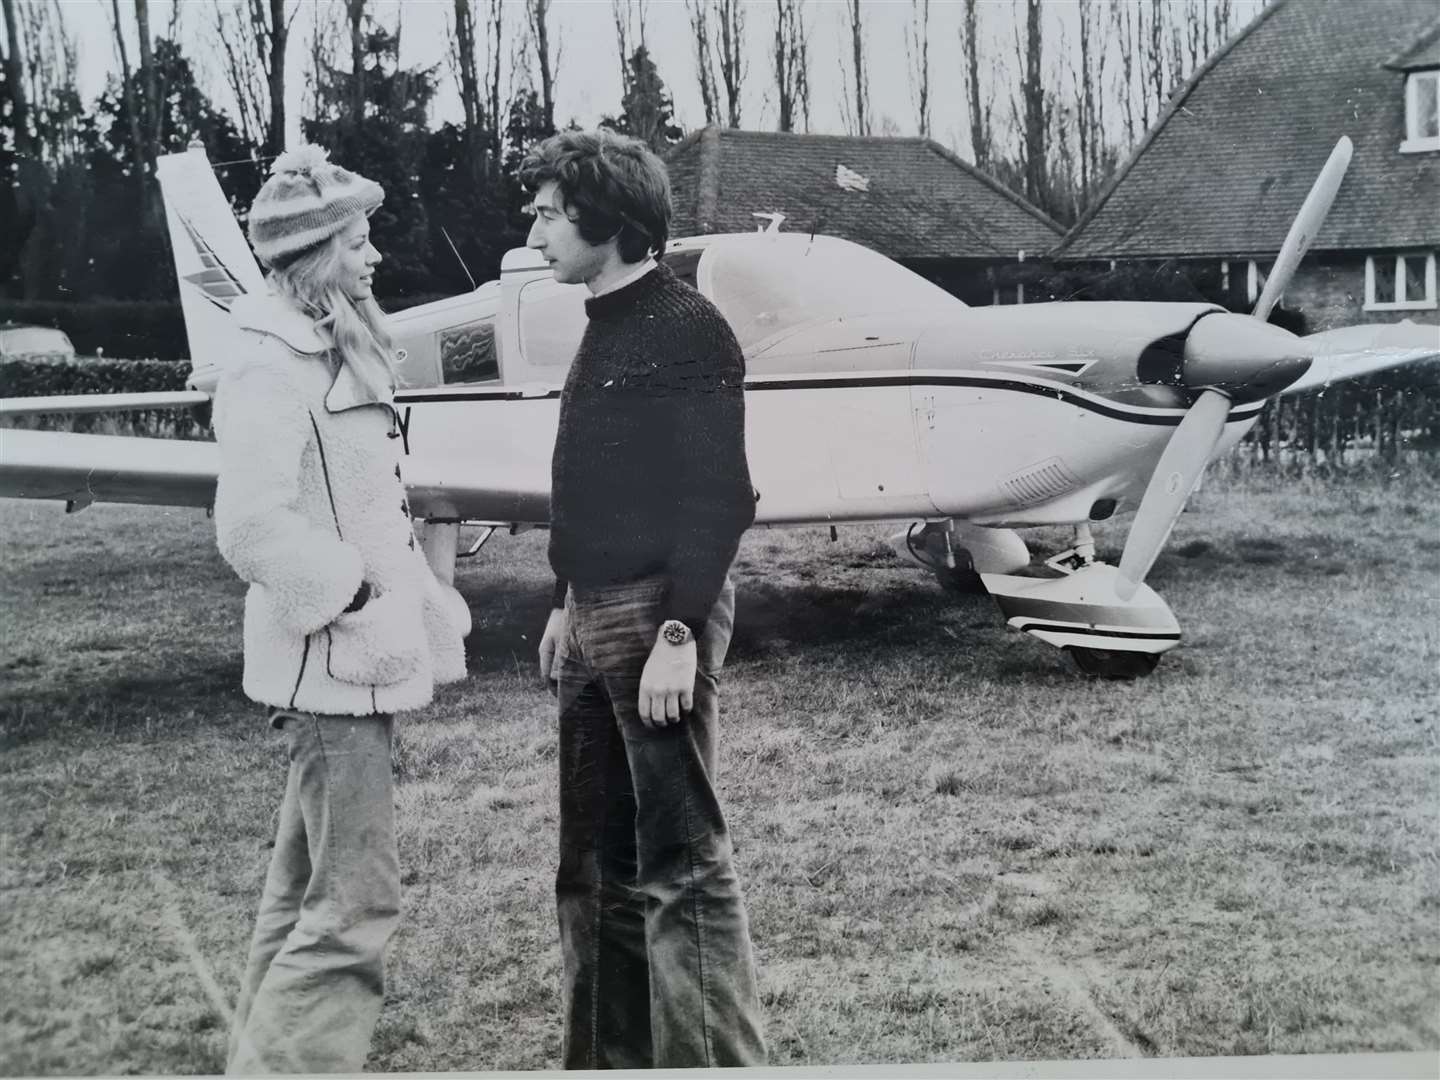 The couple were keen pilots